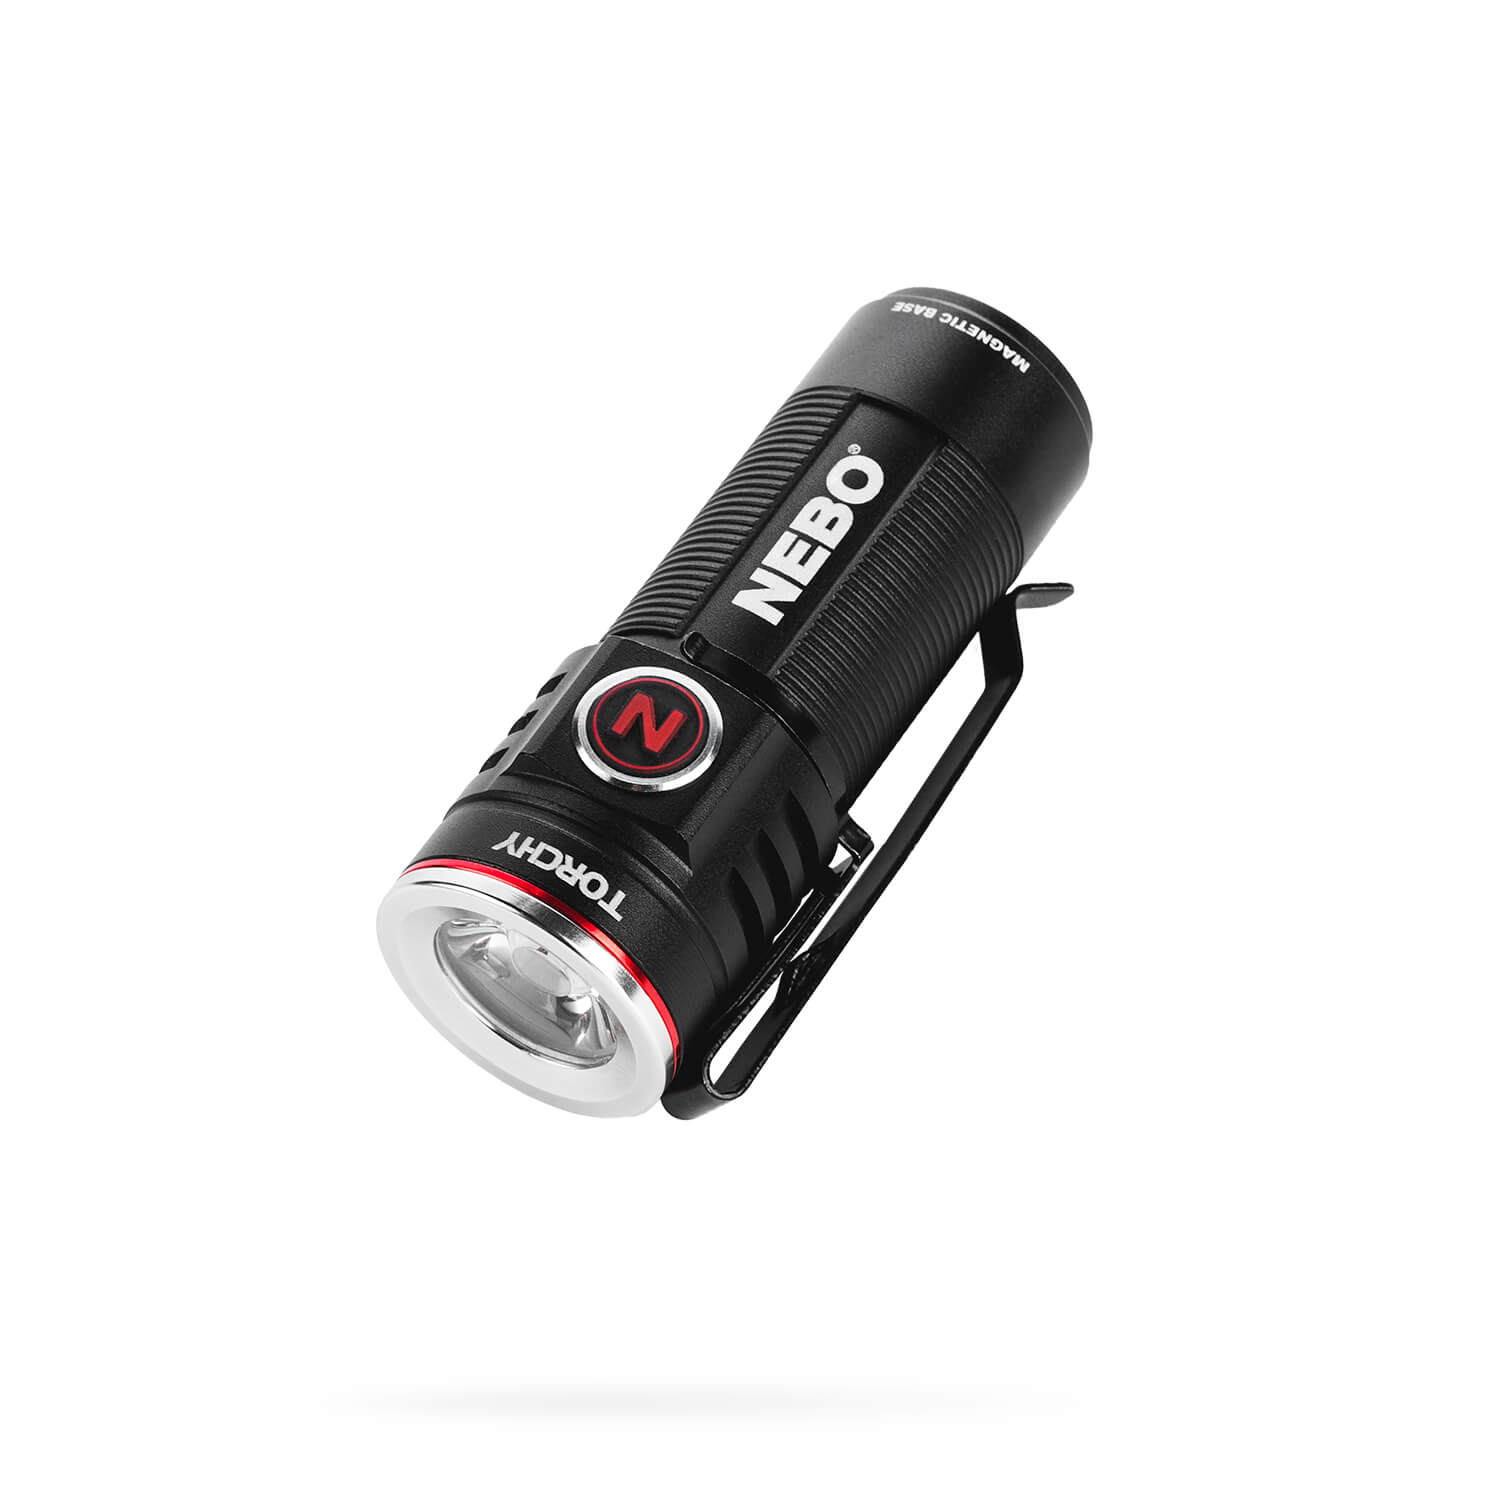 NEBO Torchy Ultra Compact Rechargeable Flashlight